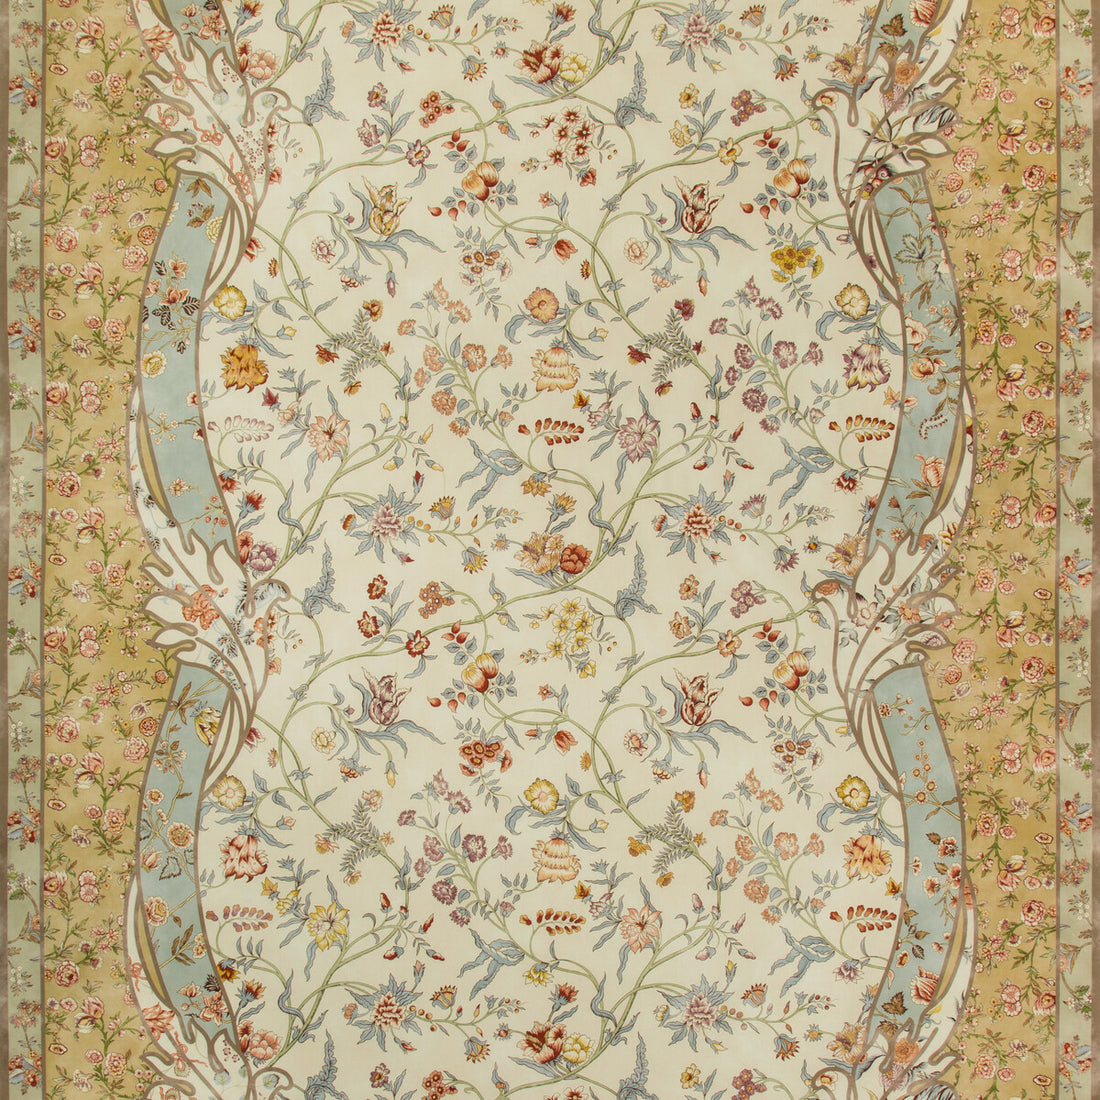 Menars Border II fabric in meadow color - pattern 8019126.134.0 - by Brunschwig &amp; Fils in the Folio Francais collection